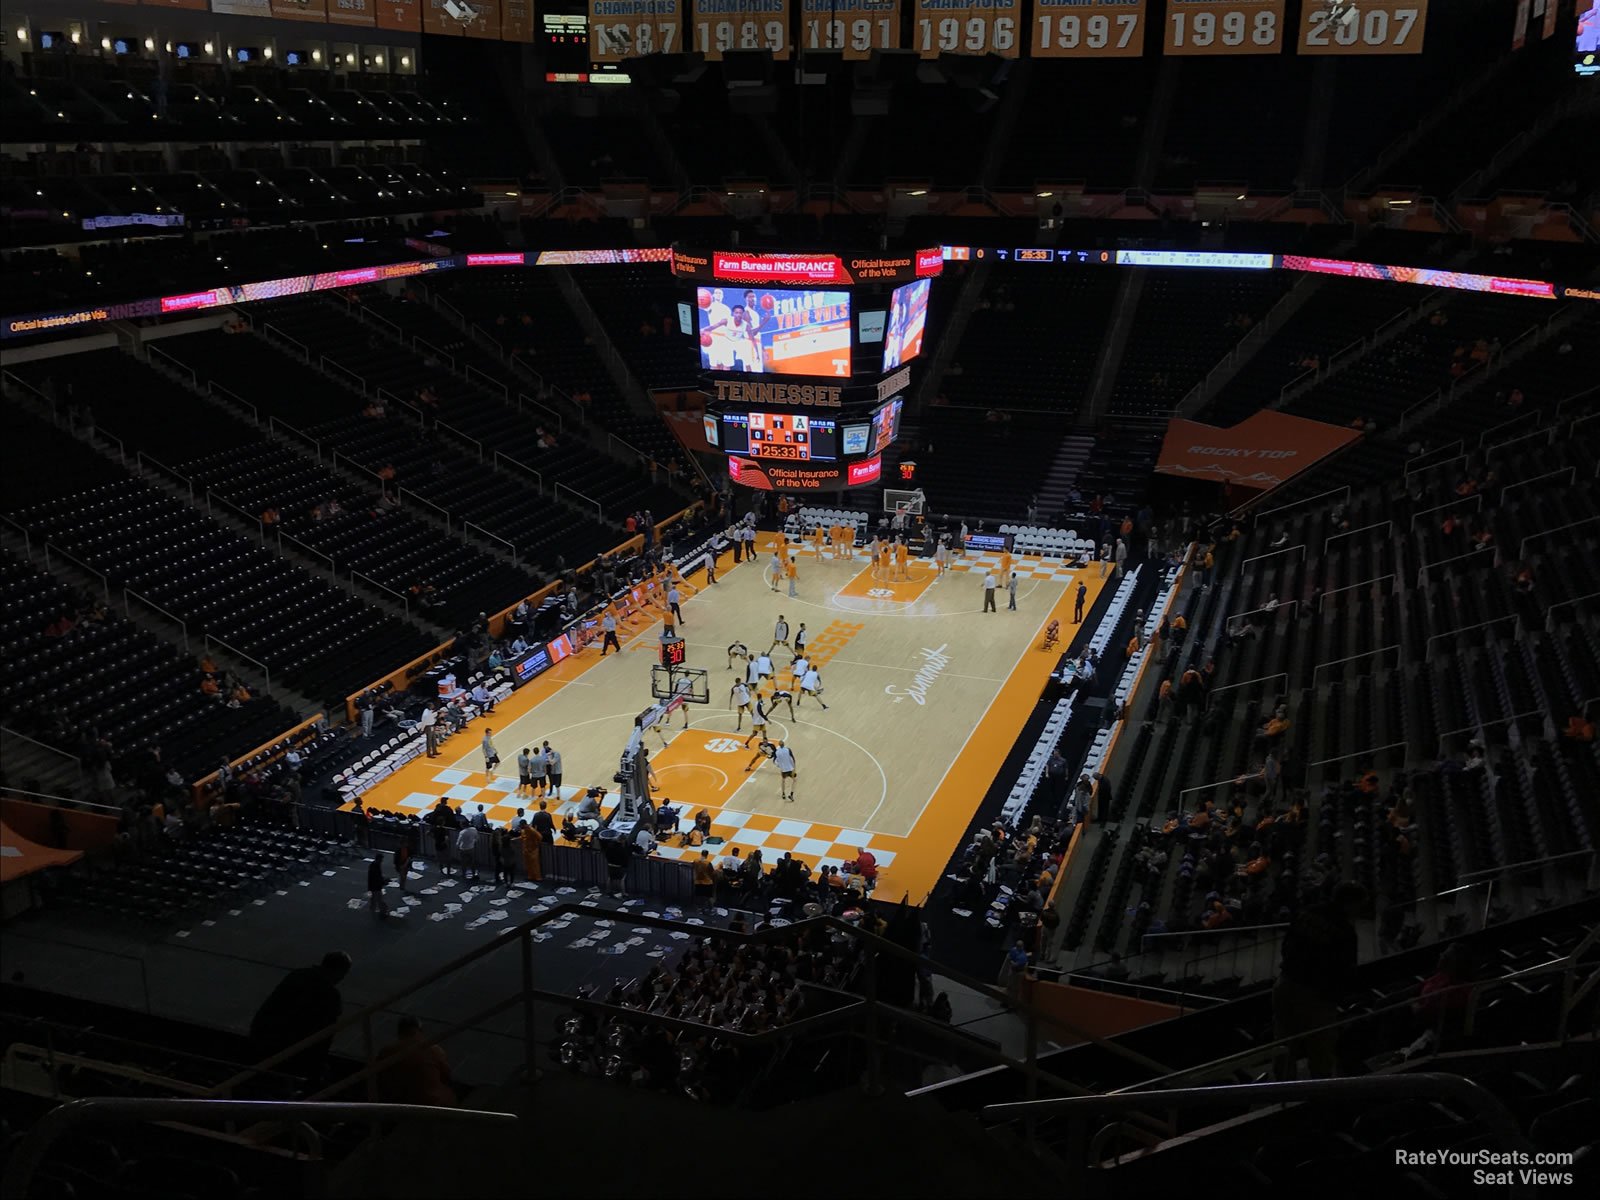 section 327a, row 7 seat view  - thompson-boling arena